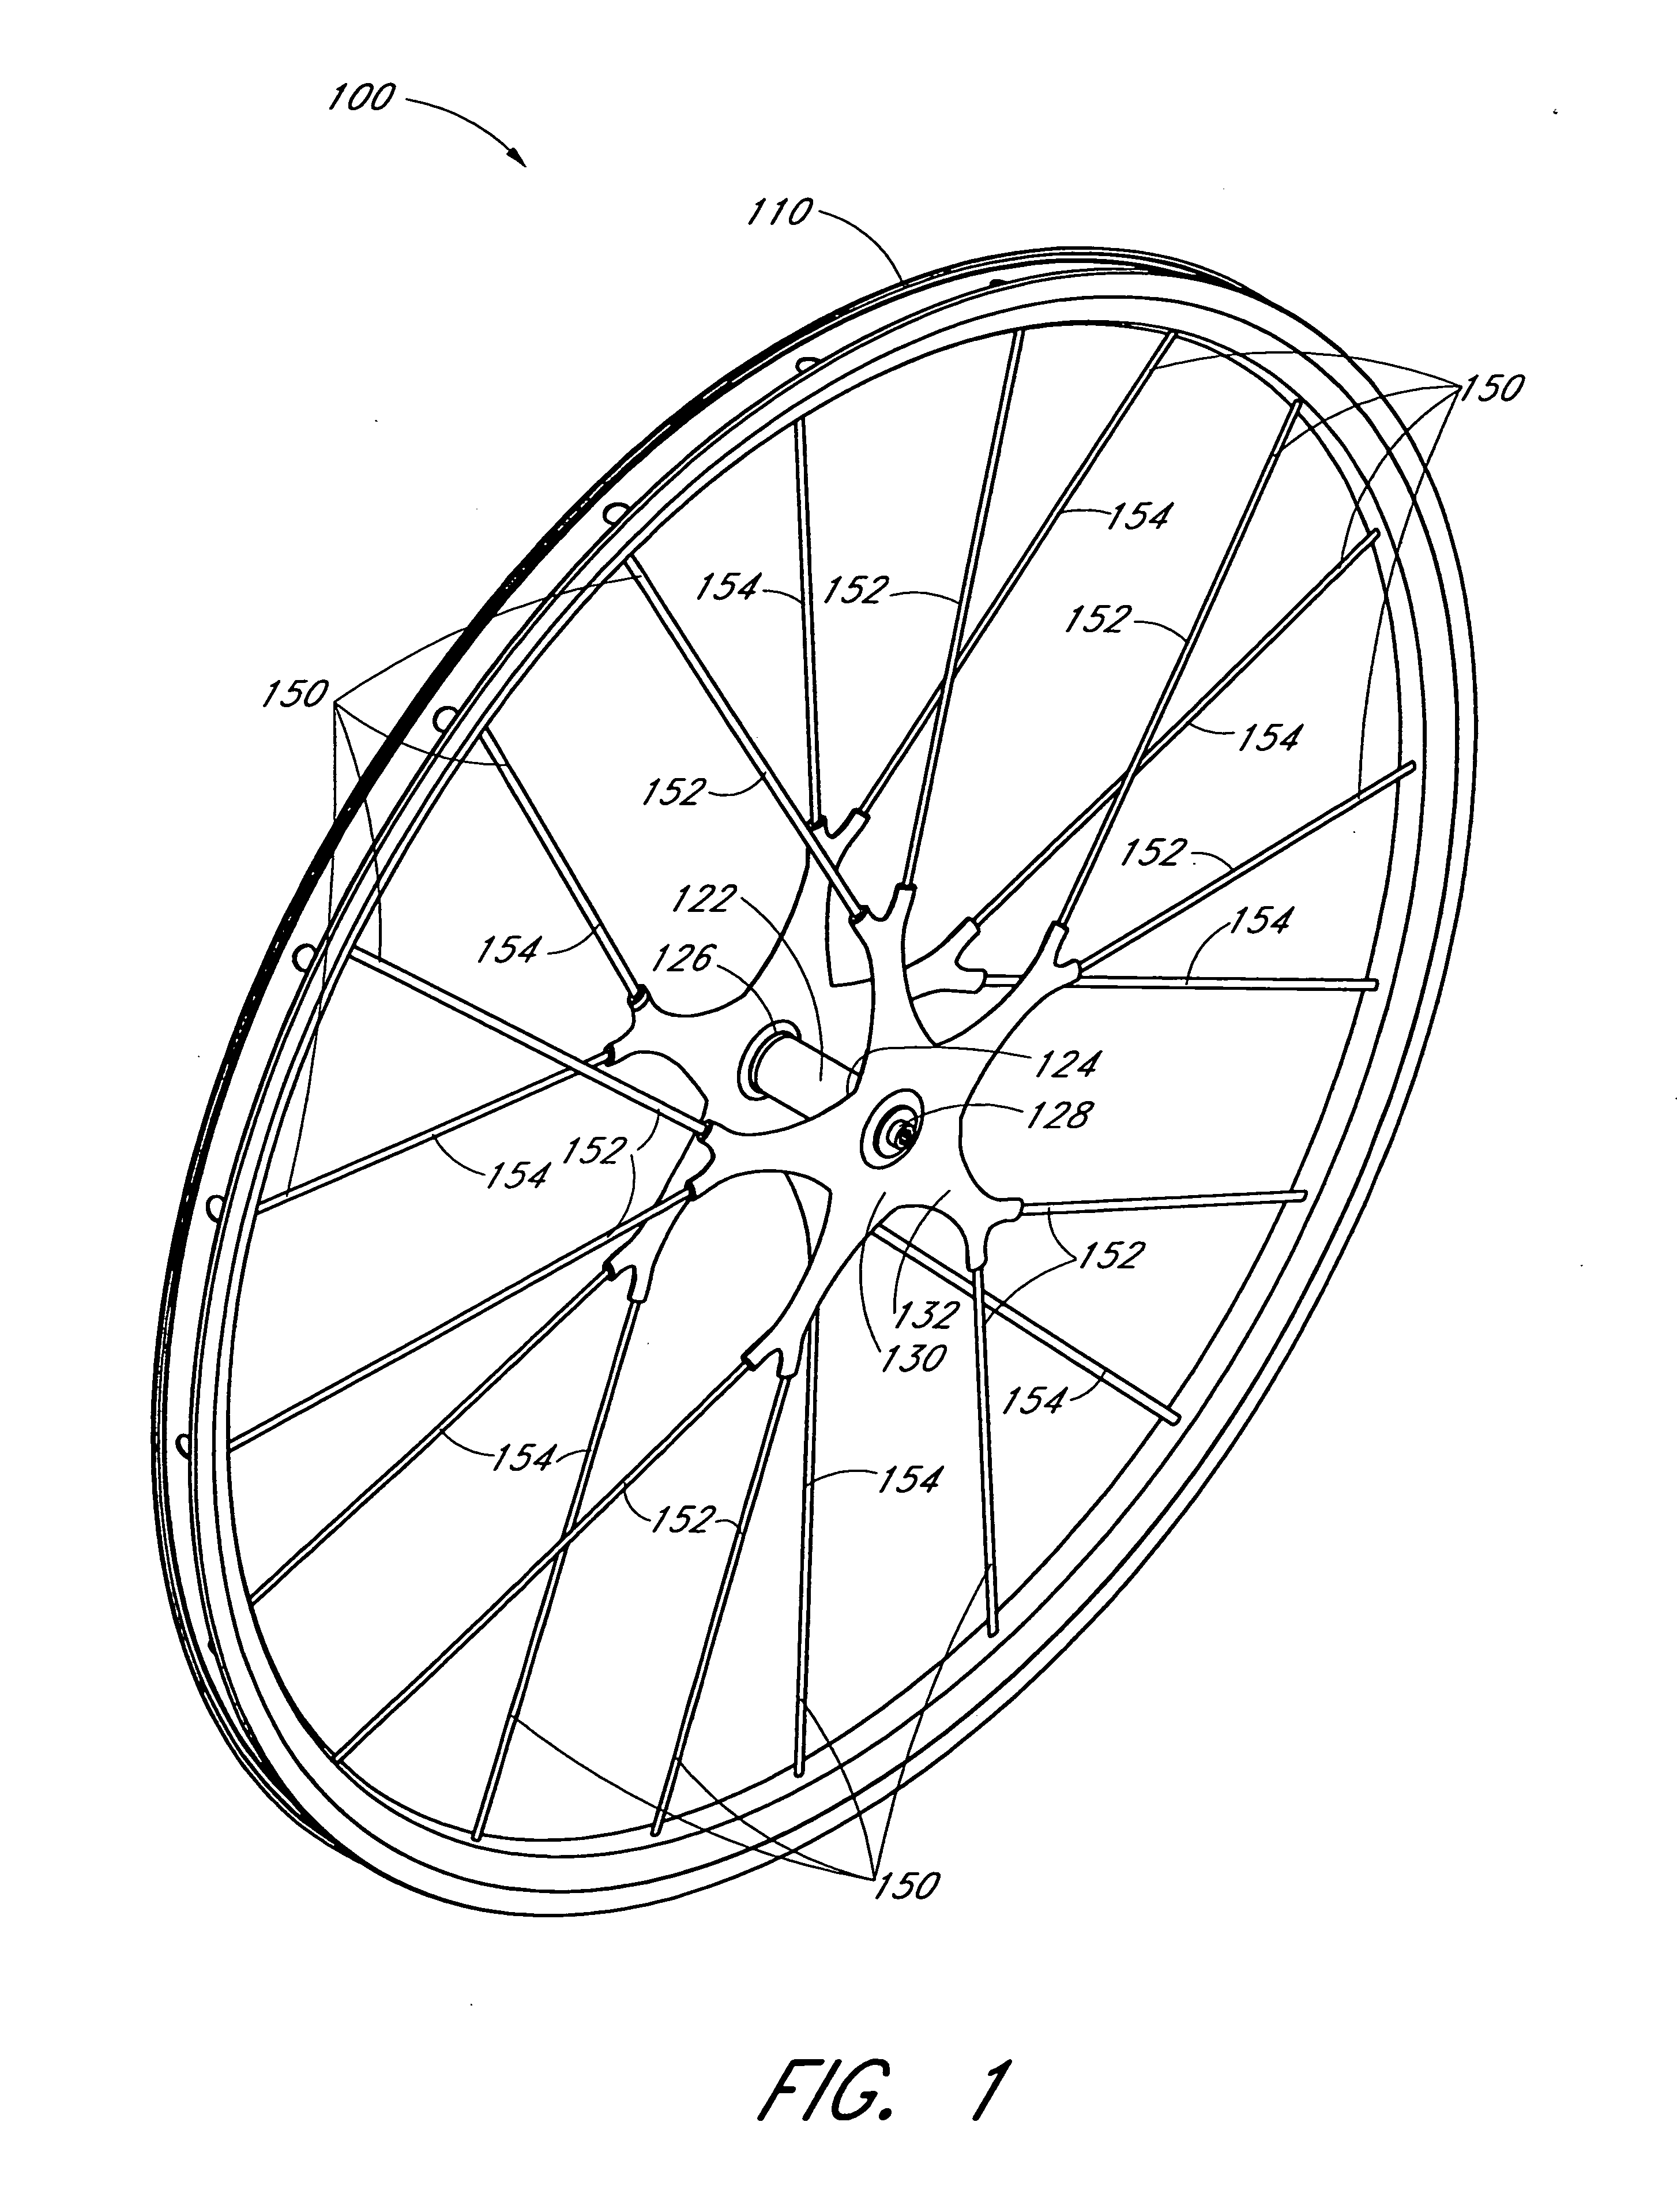 Bicycle wheel and release mechanism